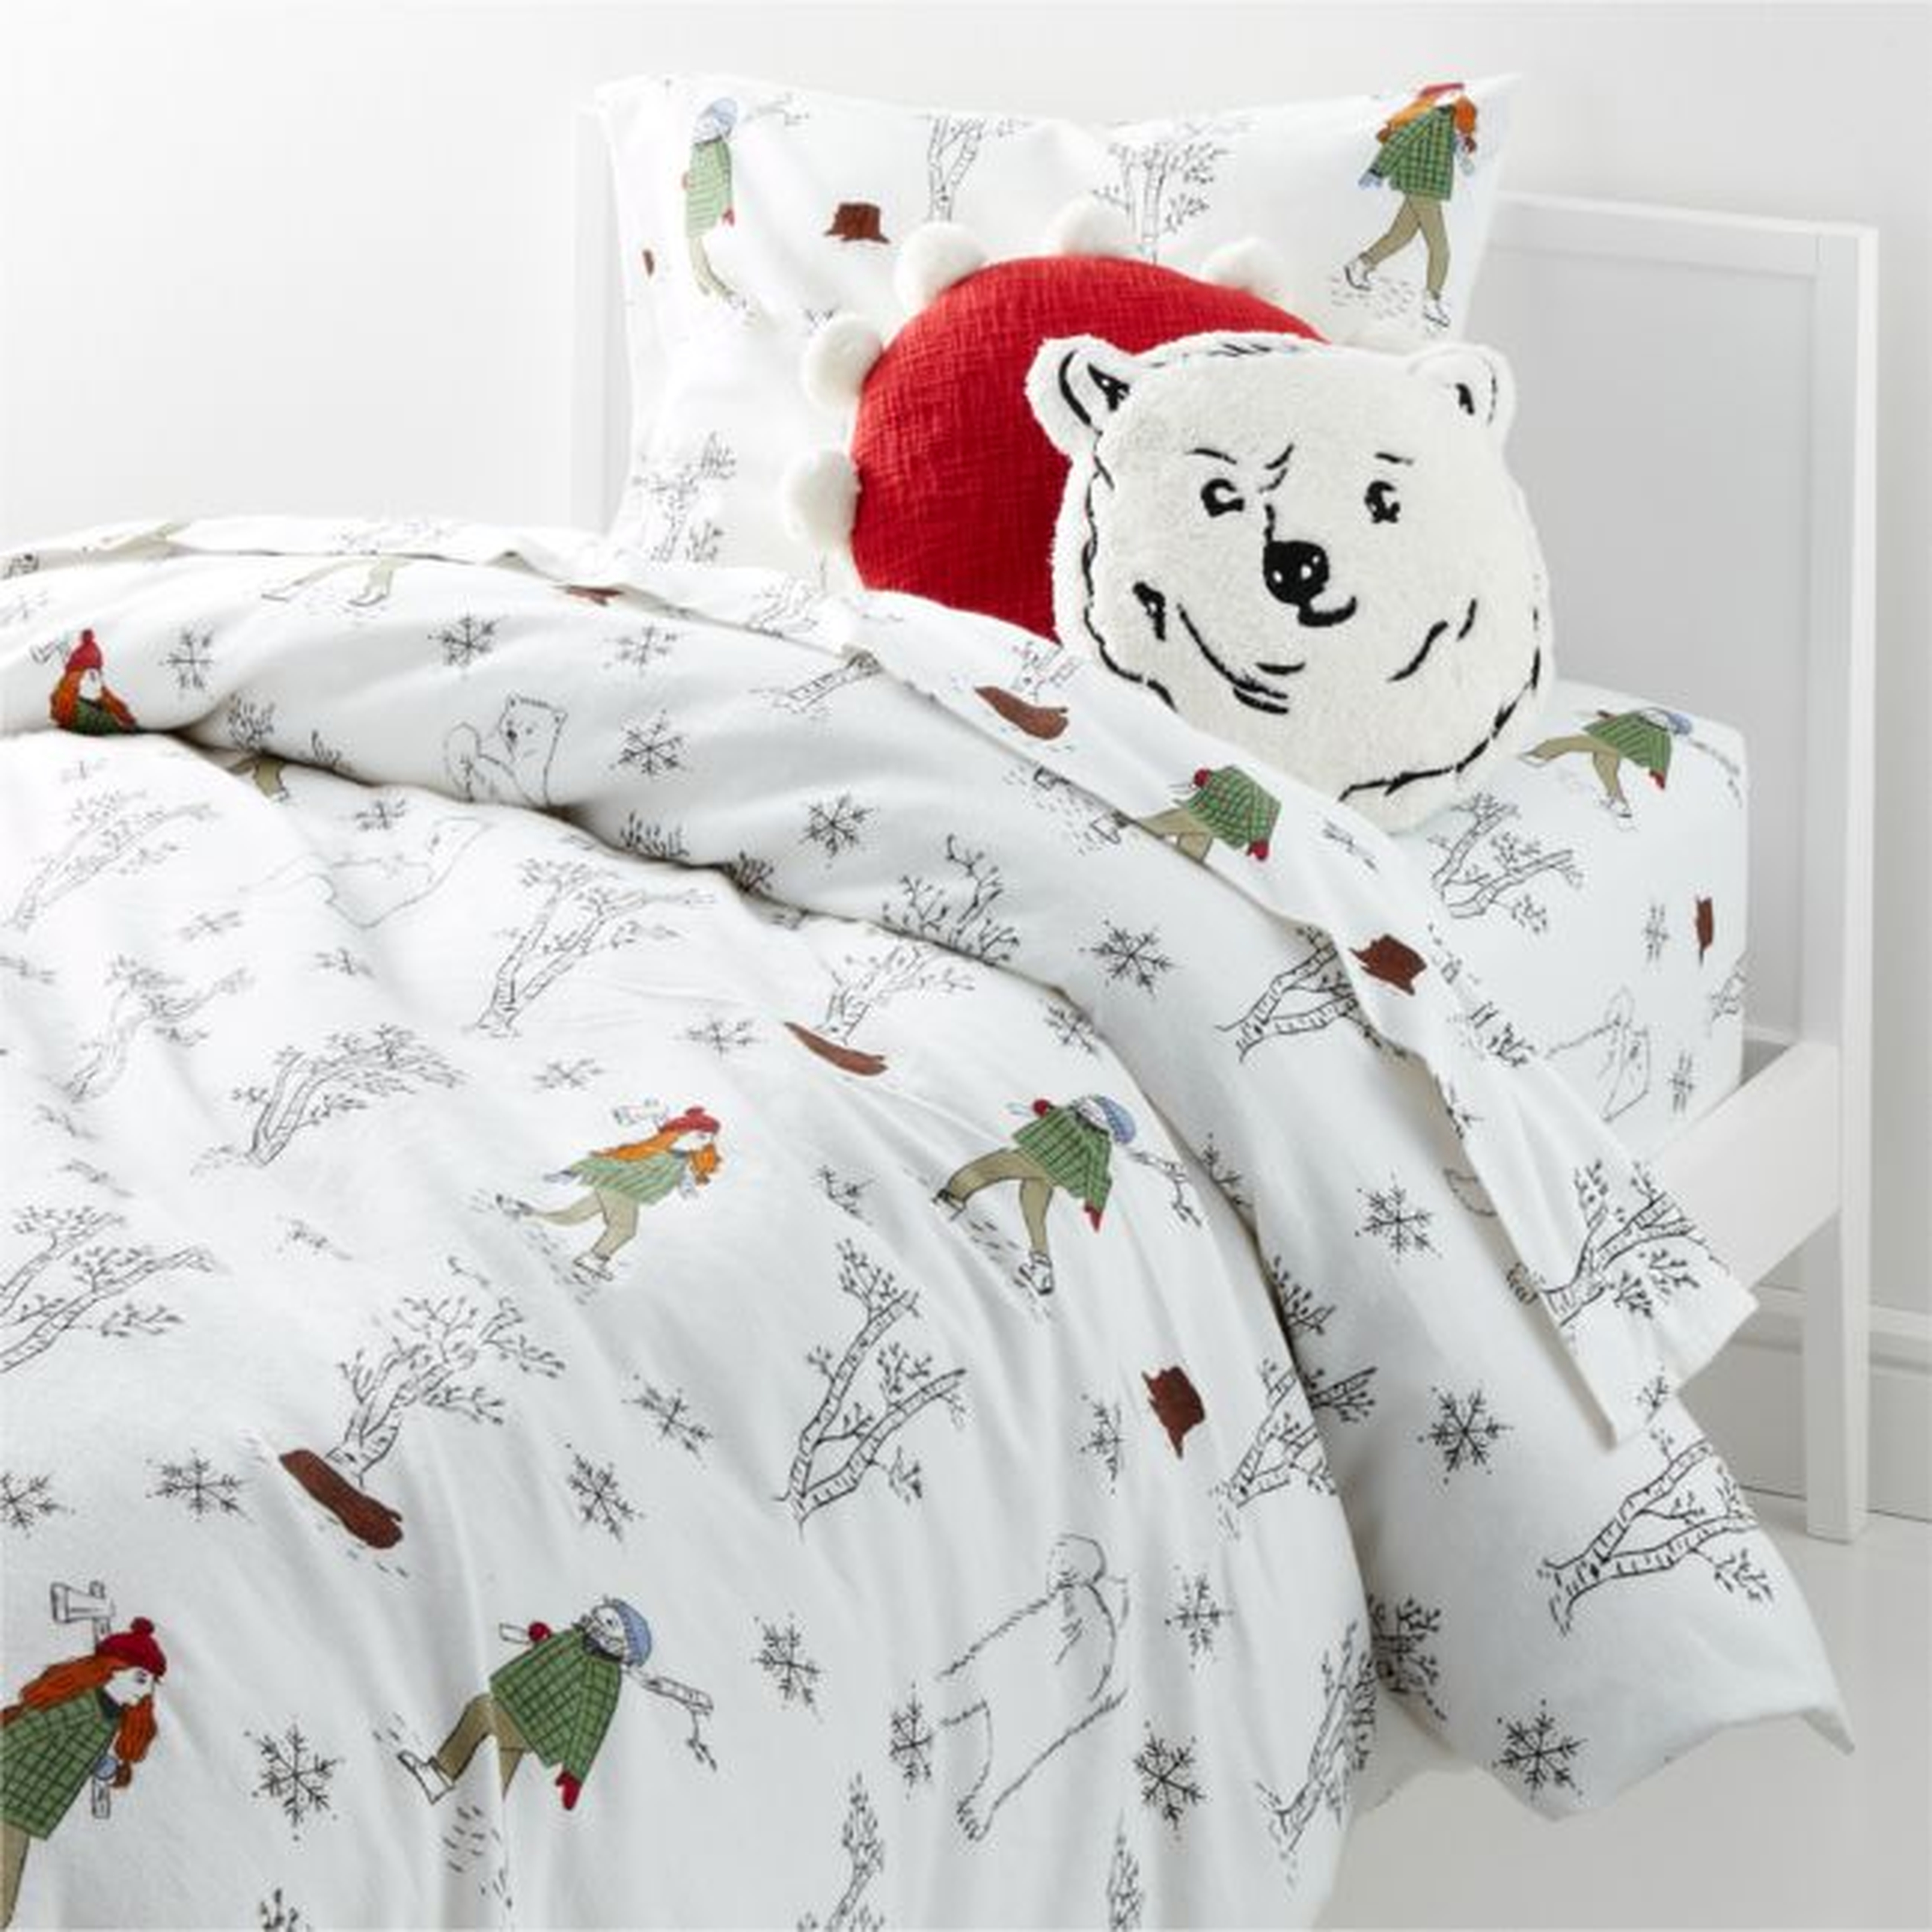 Organic Lumberjack Flannel Twin Duvet Cover - Crate and Barrel